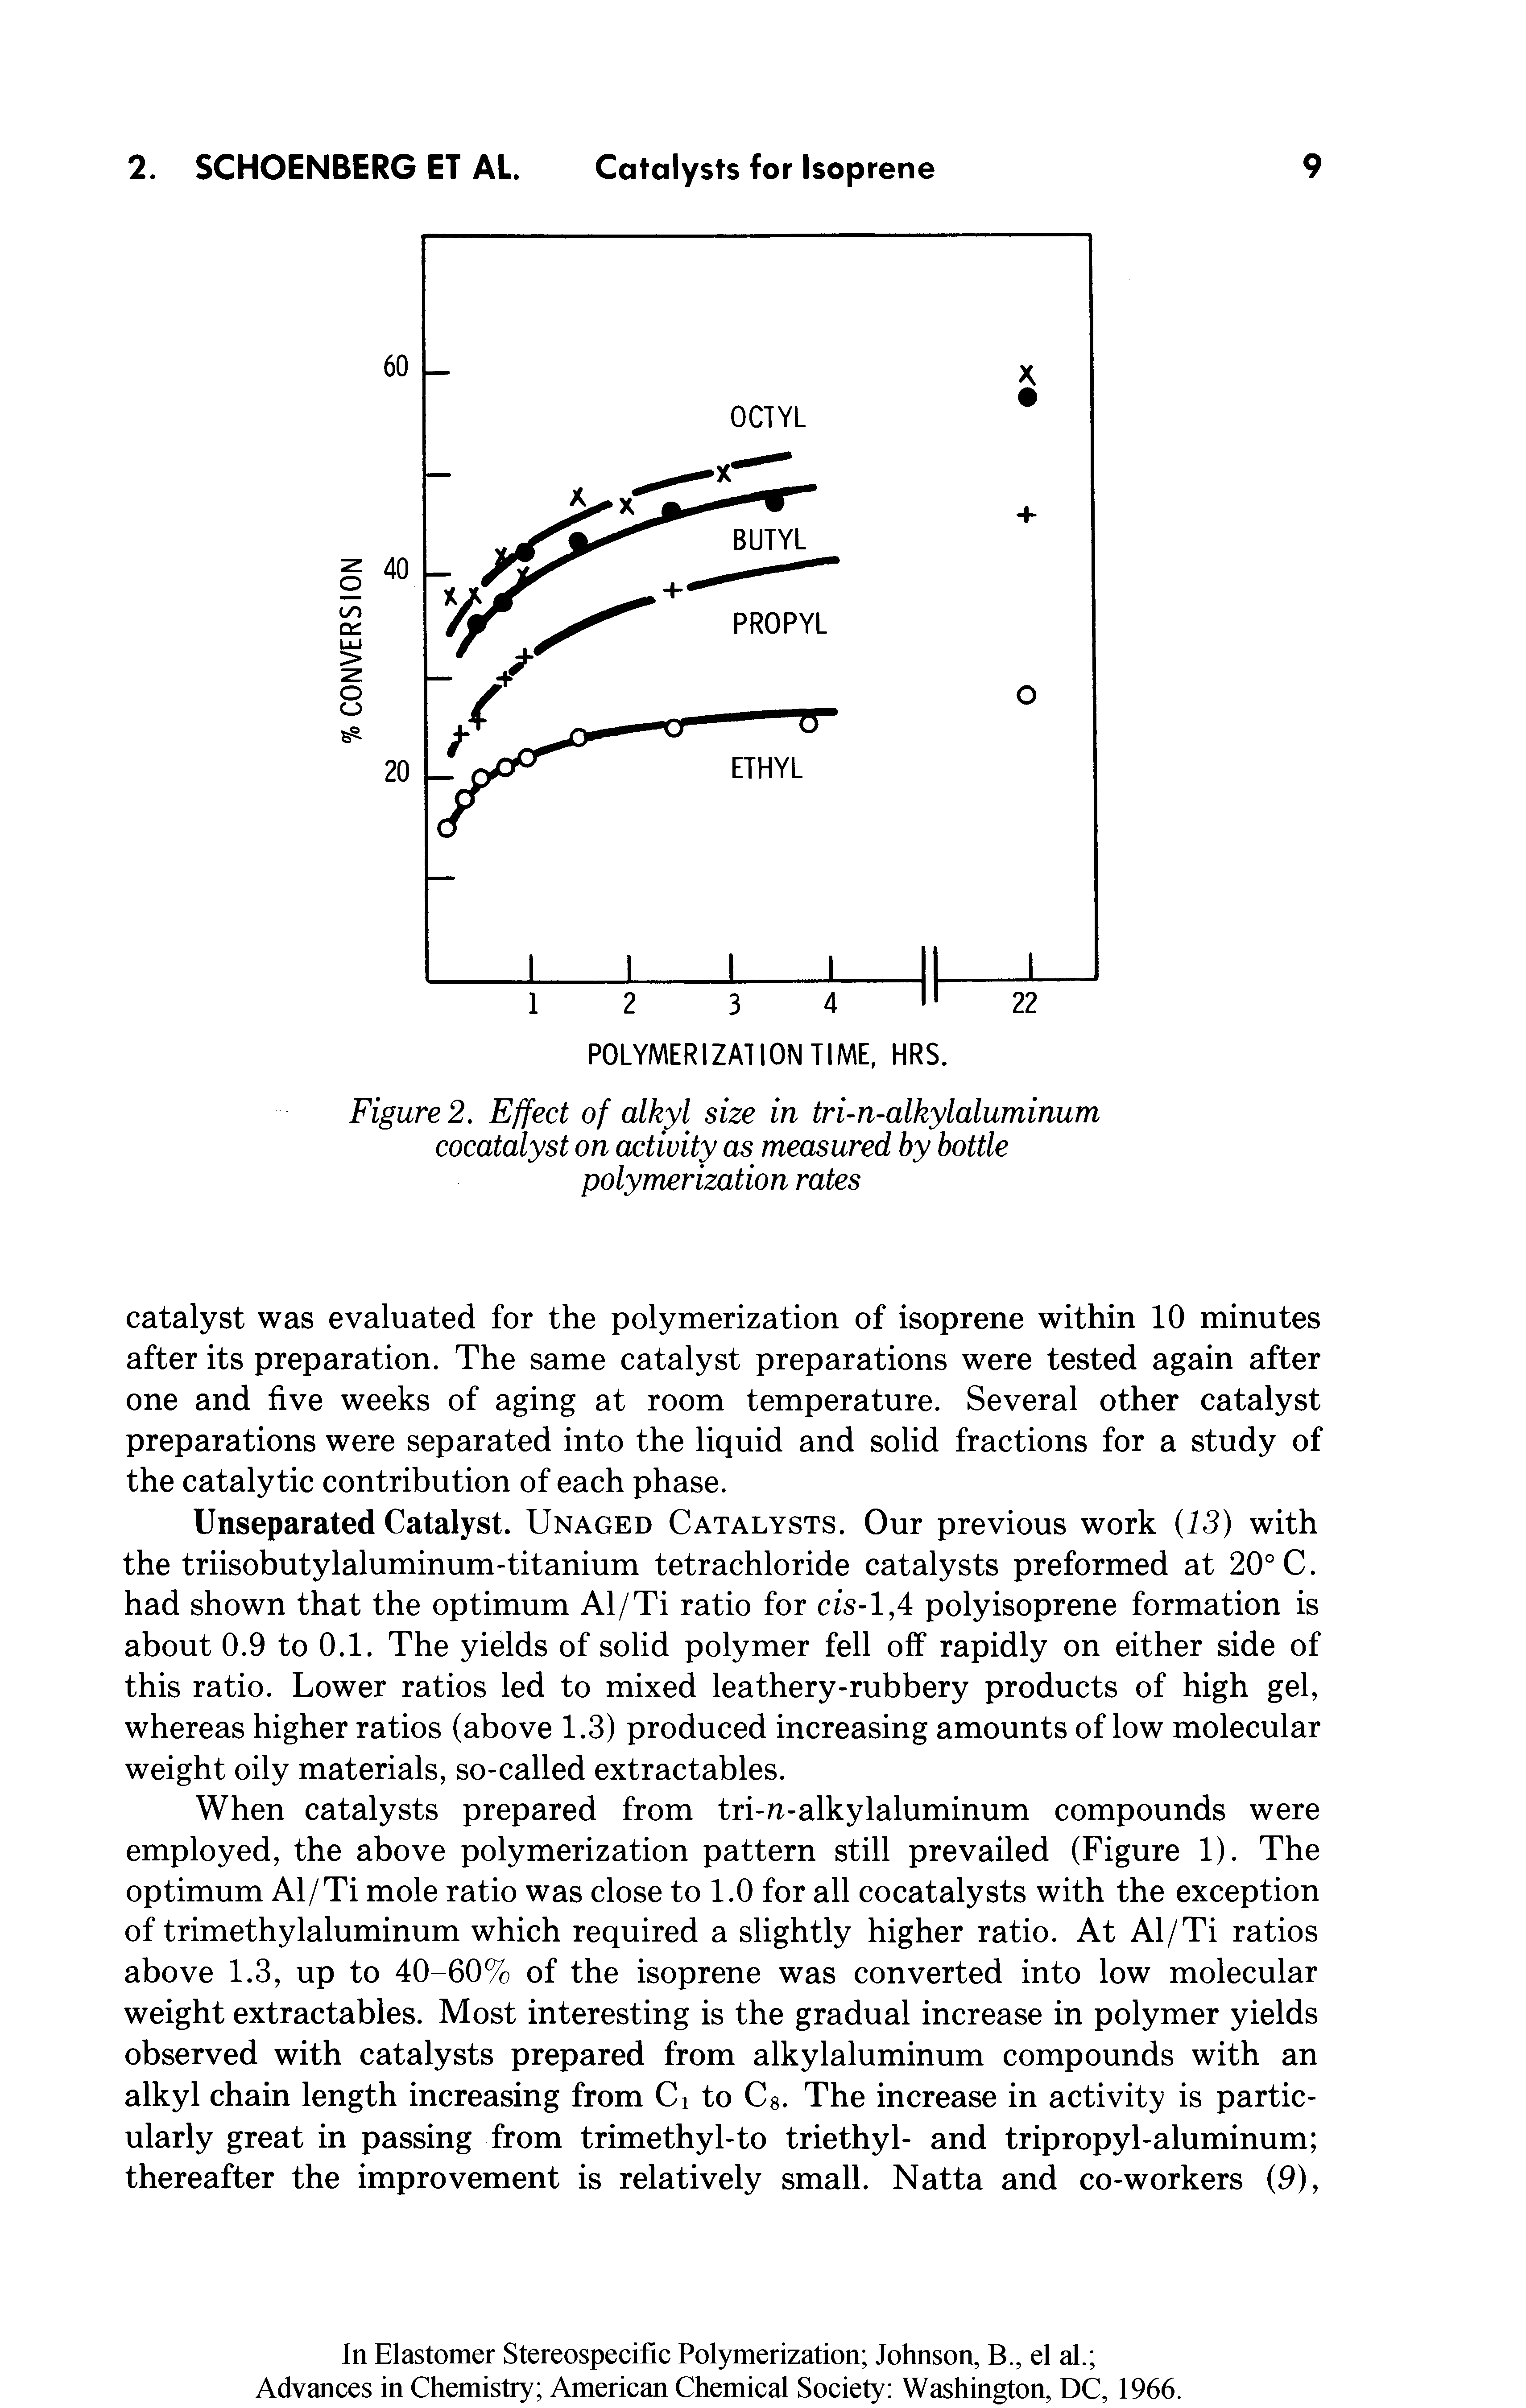 Figure 2. Effect of alkyl size in tri-n-alkylaluminum cocatalyst on activity as measured by bottle polymerization rates...